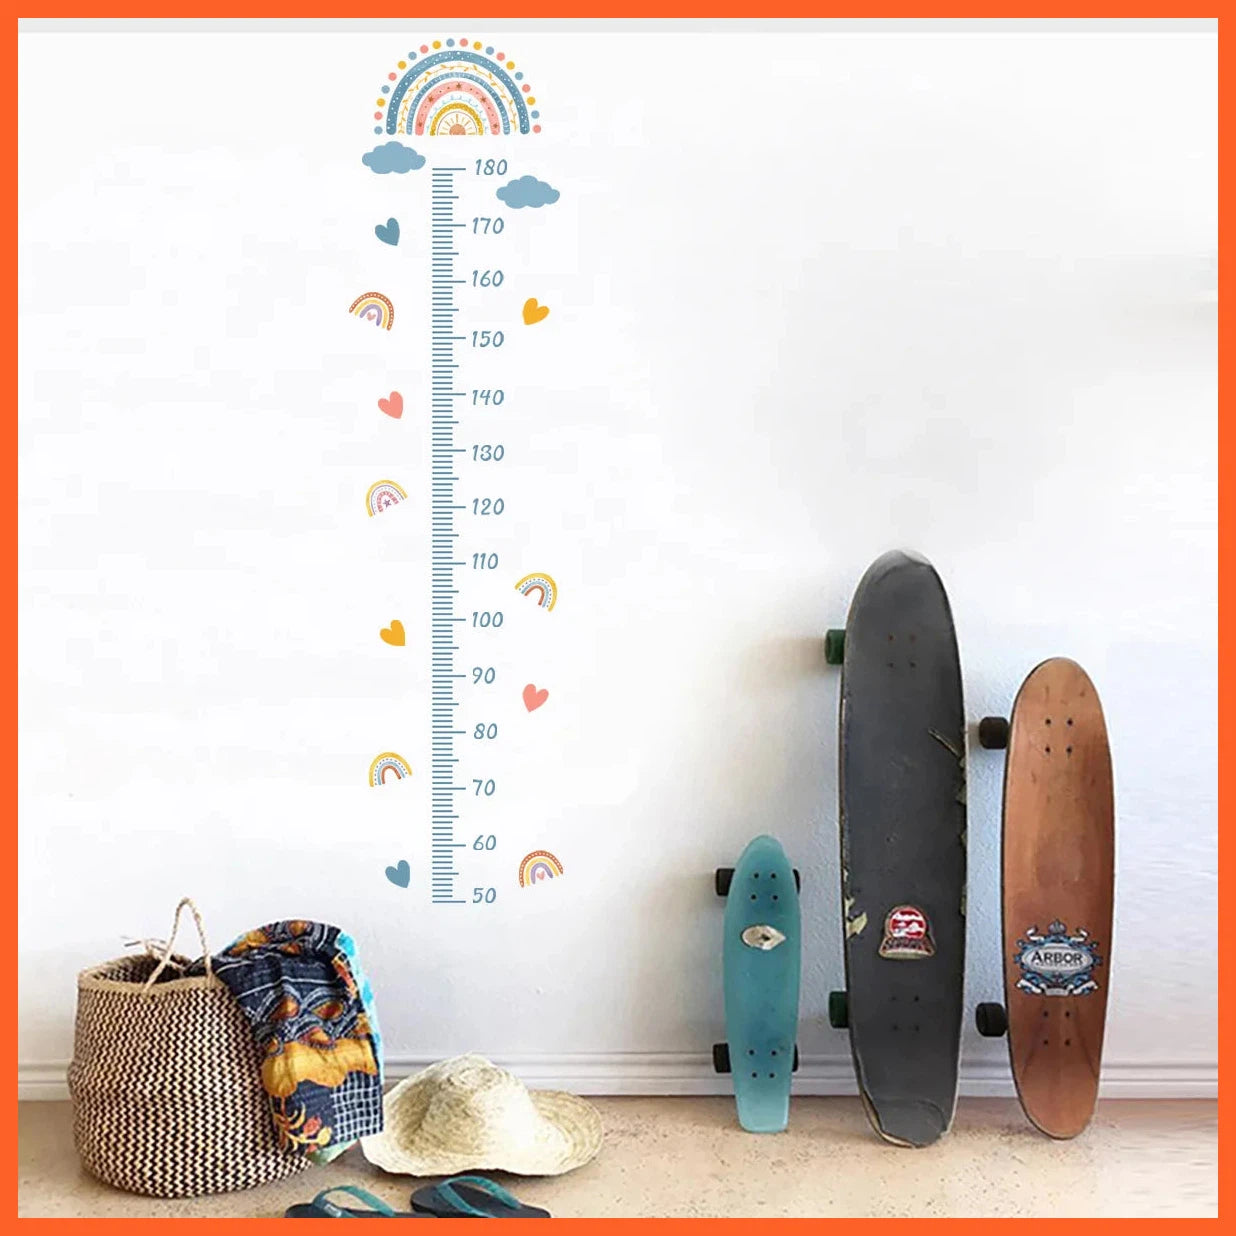 Kids Growth Chart Wall Stickers | Measure Height Record Ruler Baby Growth Chart | Decals Bedroom Nursery Decoration